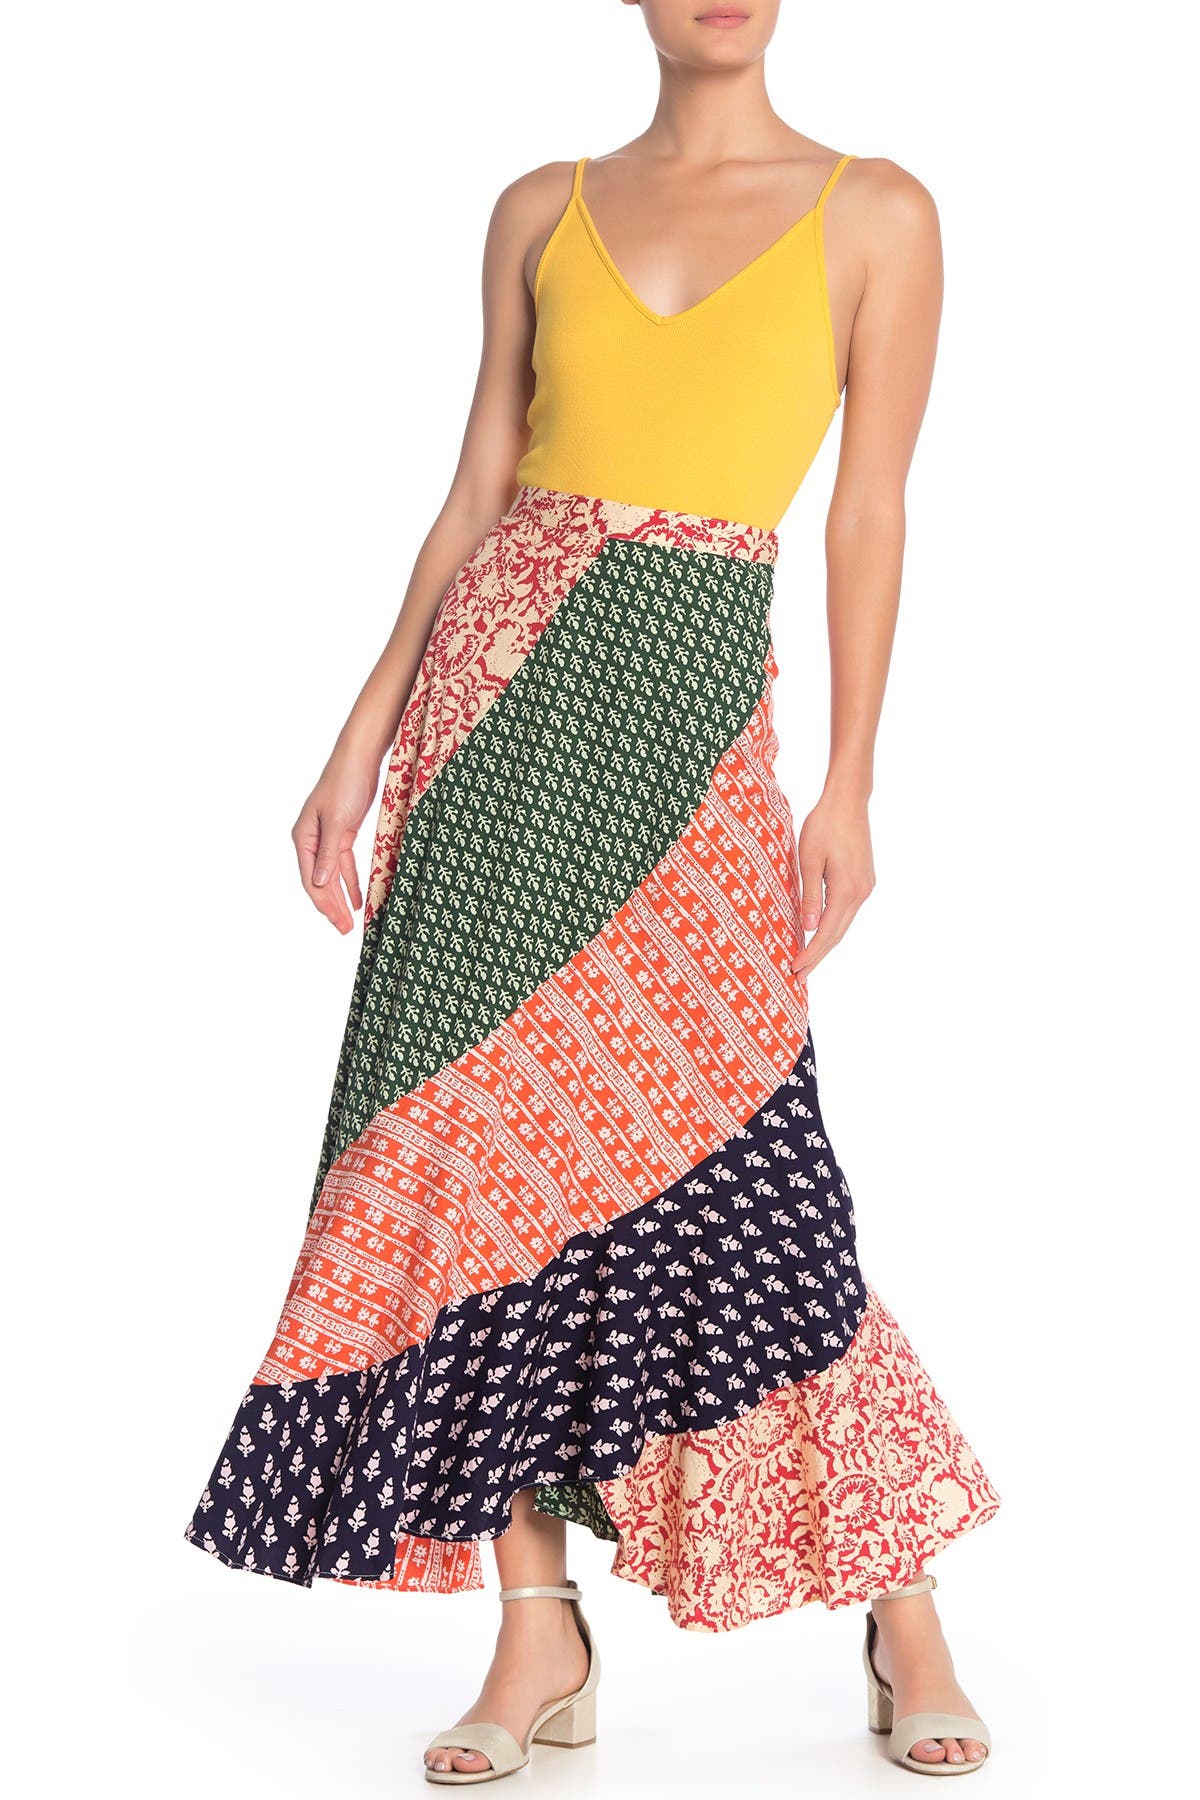 free people medley maxi skirt